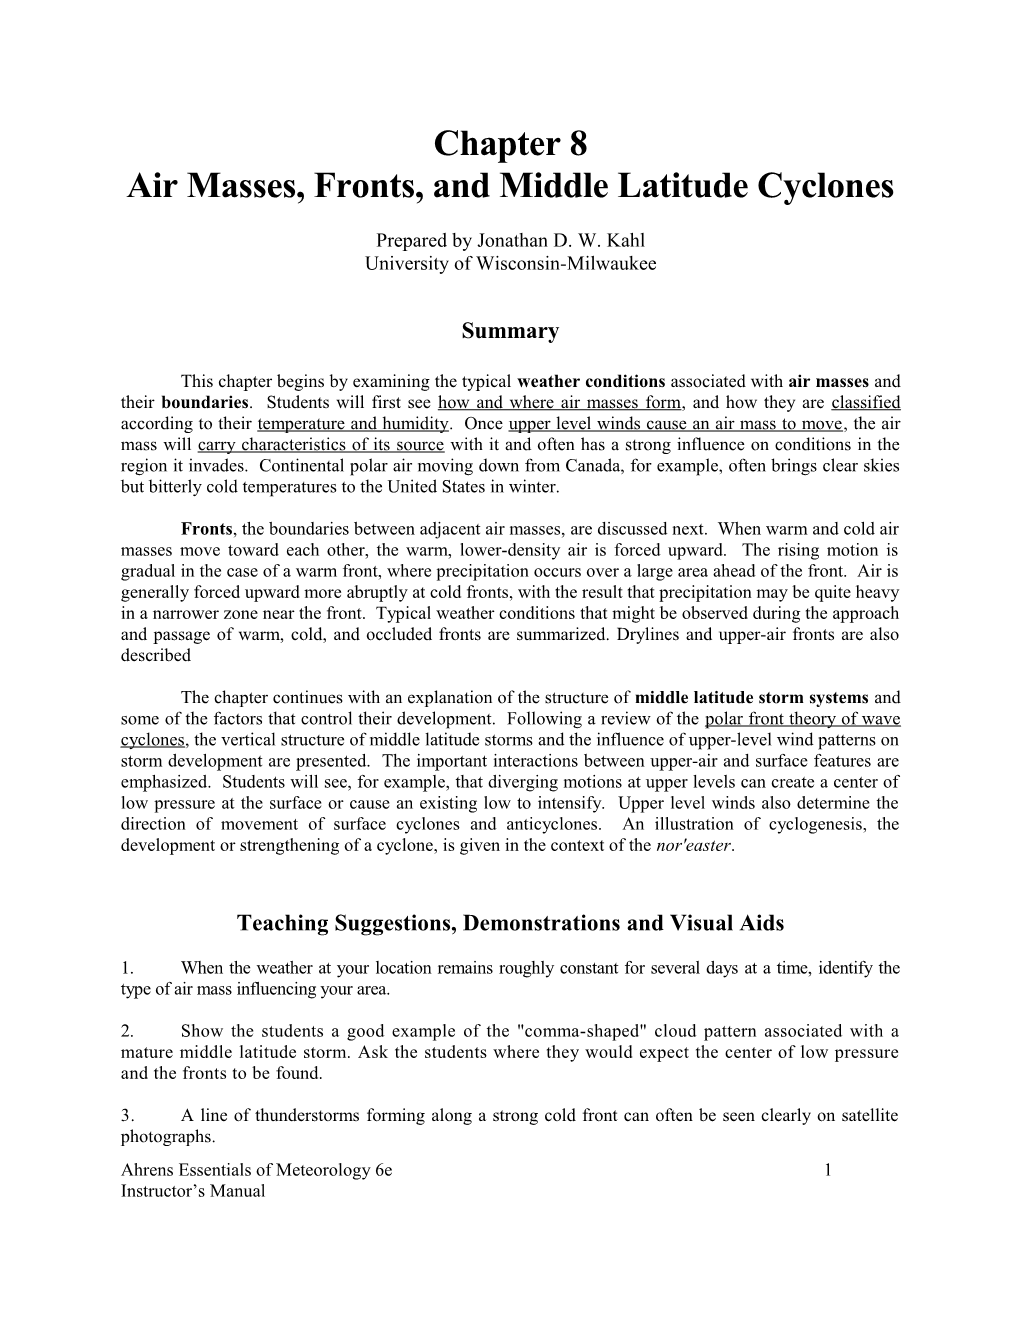 Air Masses, Fronts, and Middle Latitude Cyclones